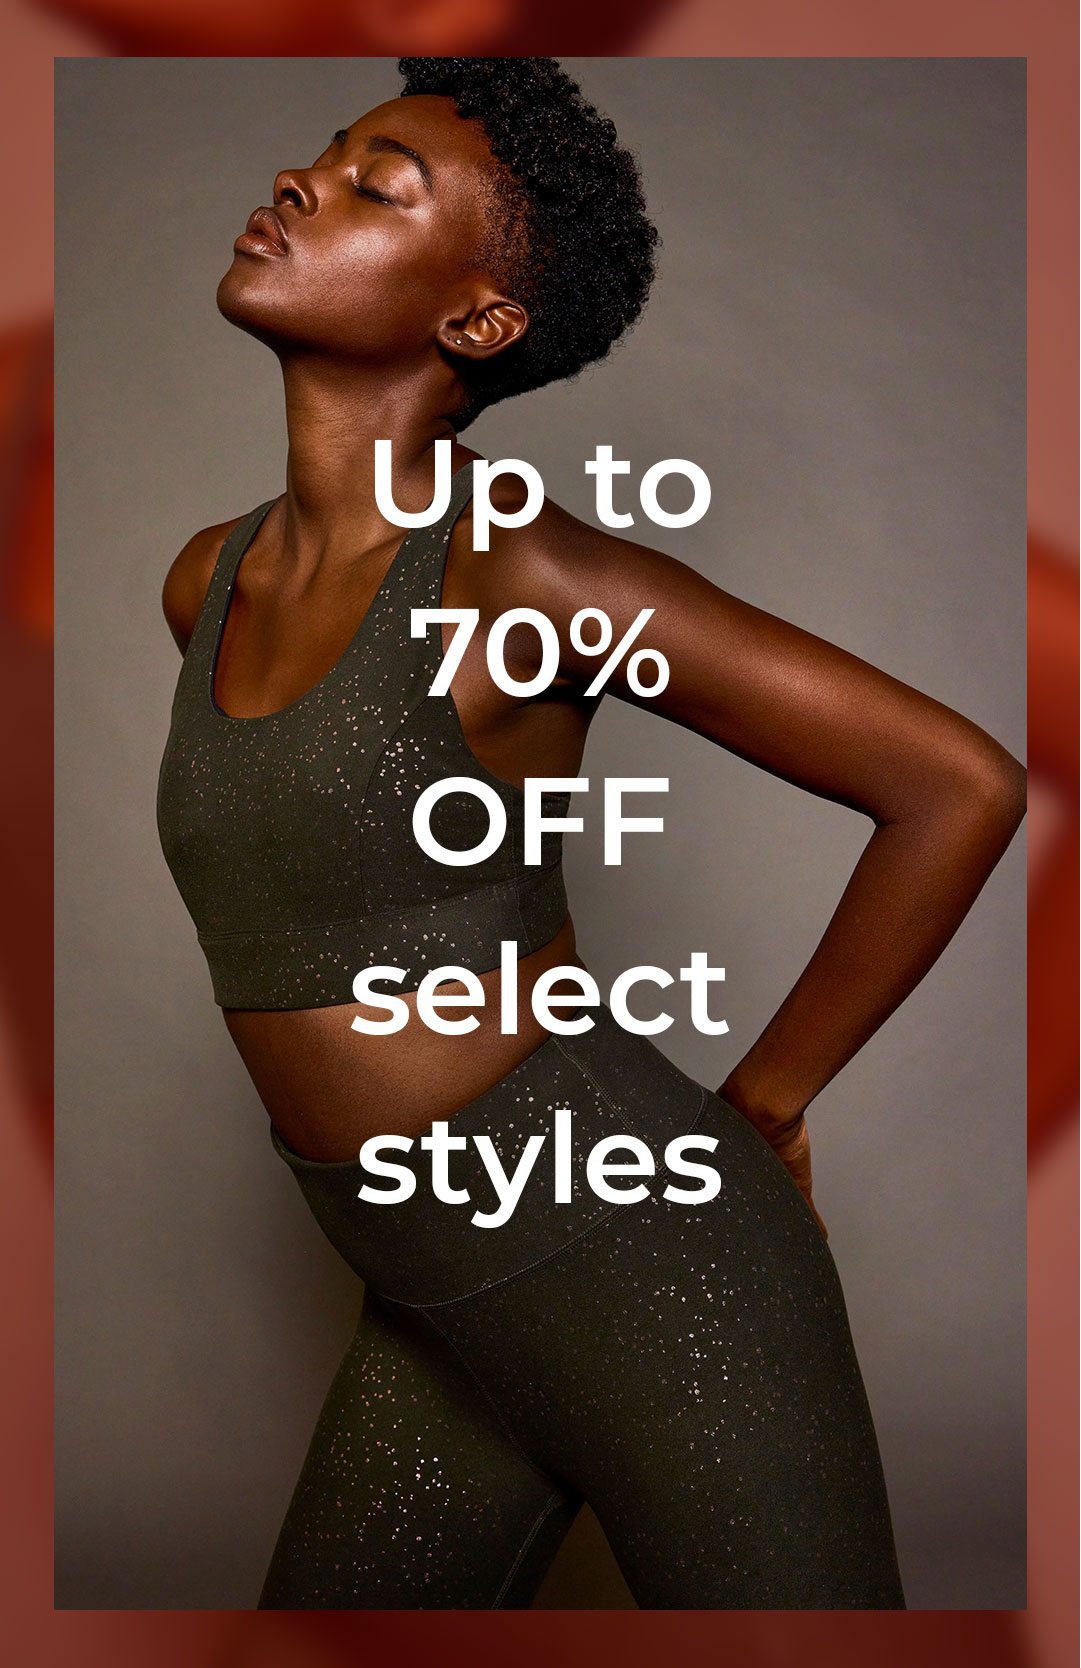 Up to 70% OFF Select Styles